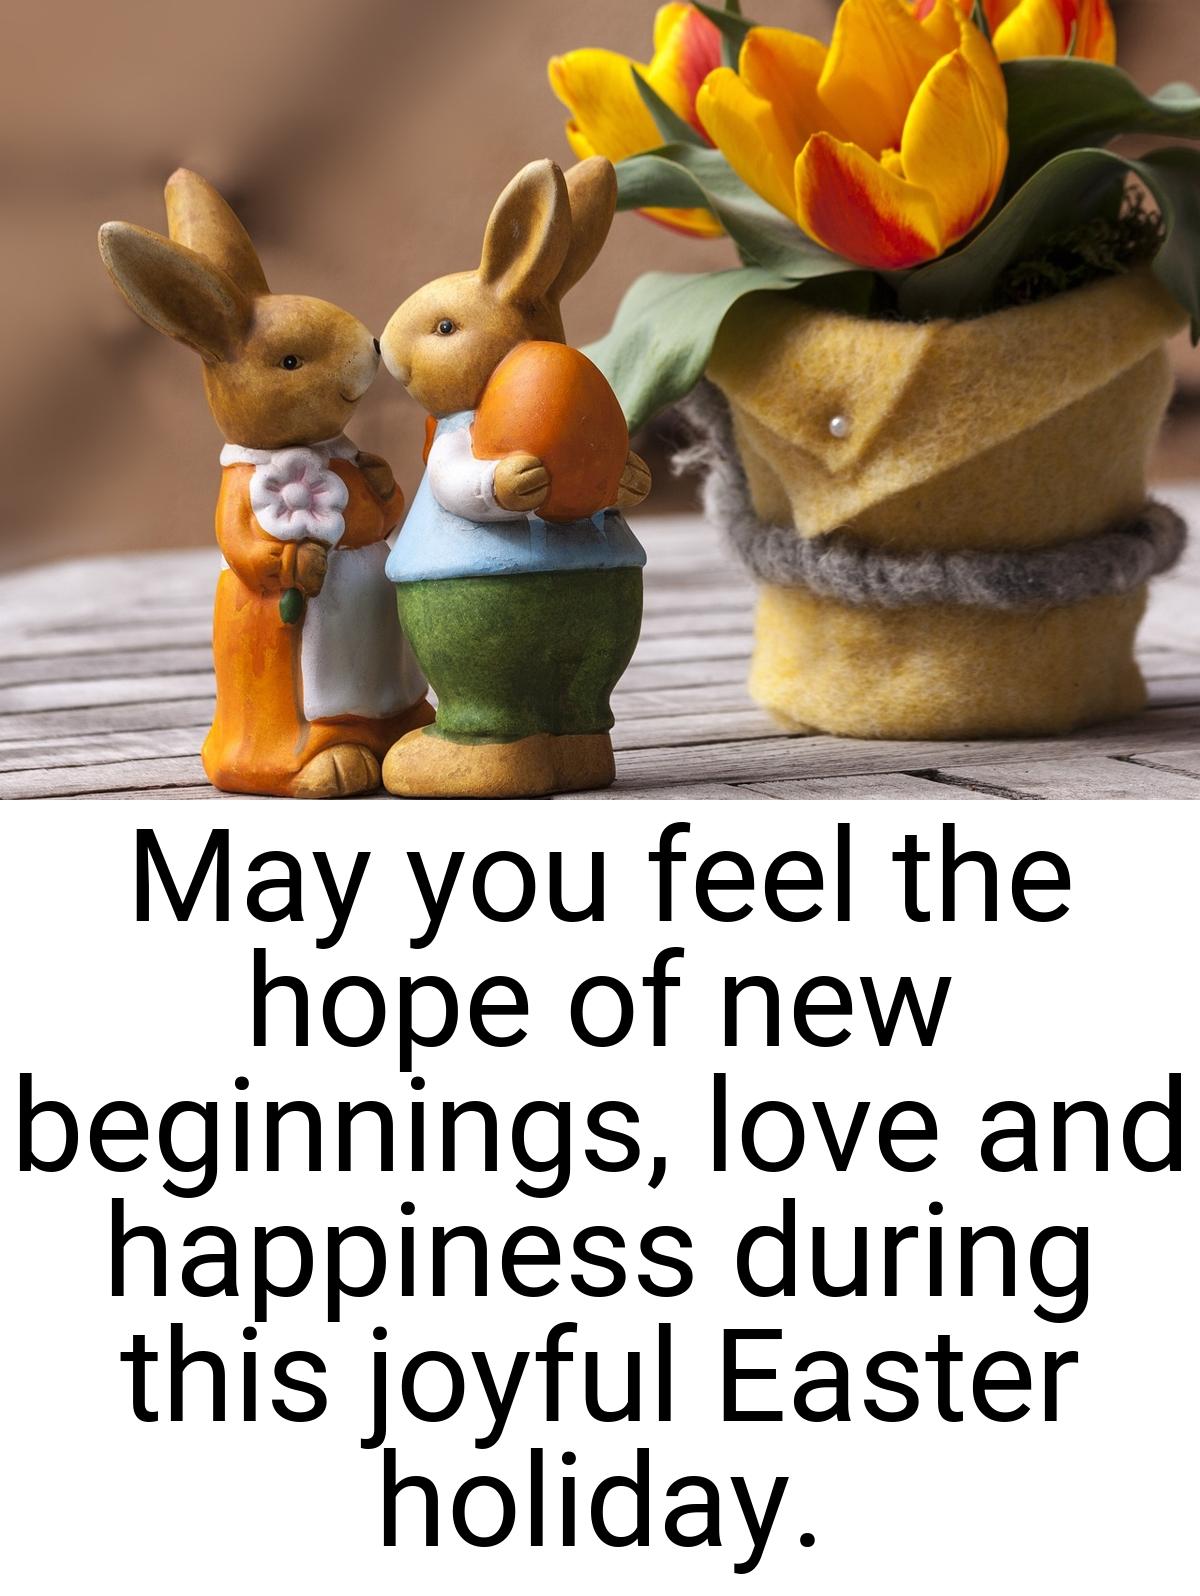 May you feel the hope of new beginnings, love and happiness